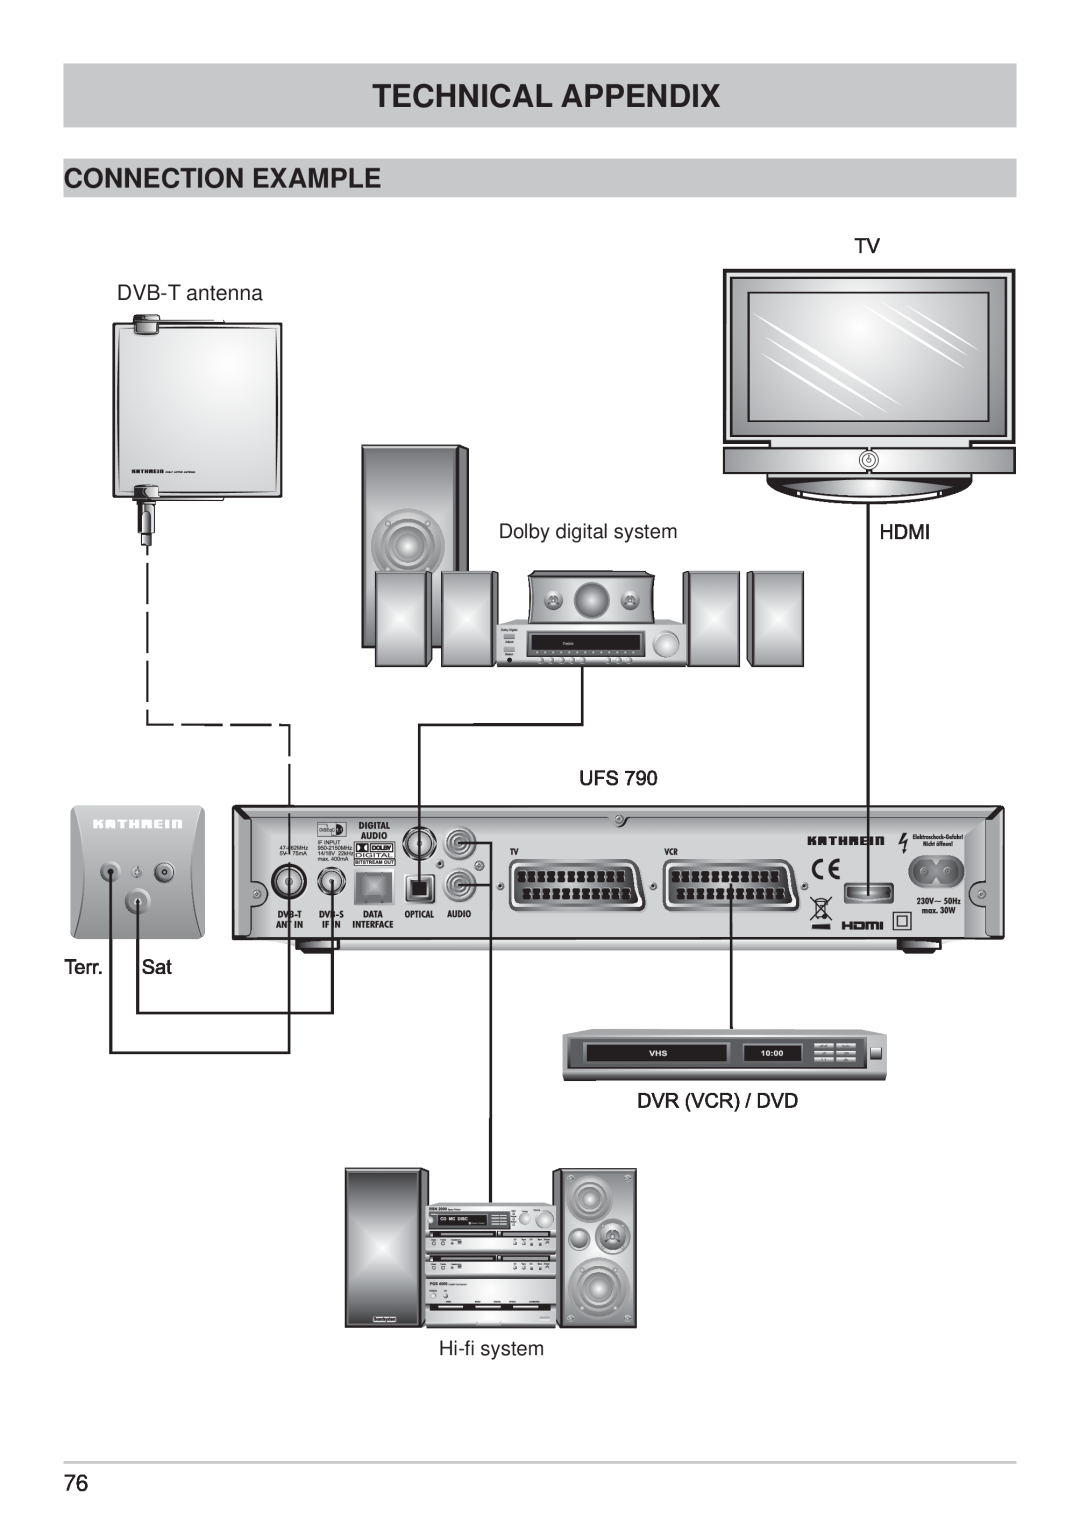 Kathrein UFS 790sw, UFS 790si manual Connection Example, Technical Appendix, DVB-T antenna, Dolby digital system 